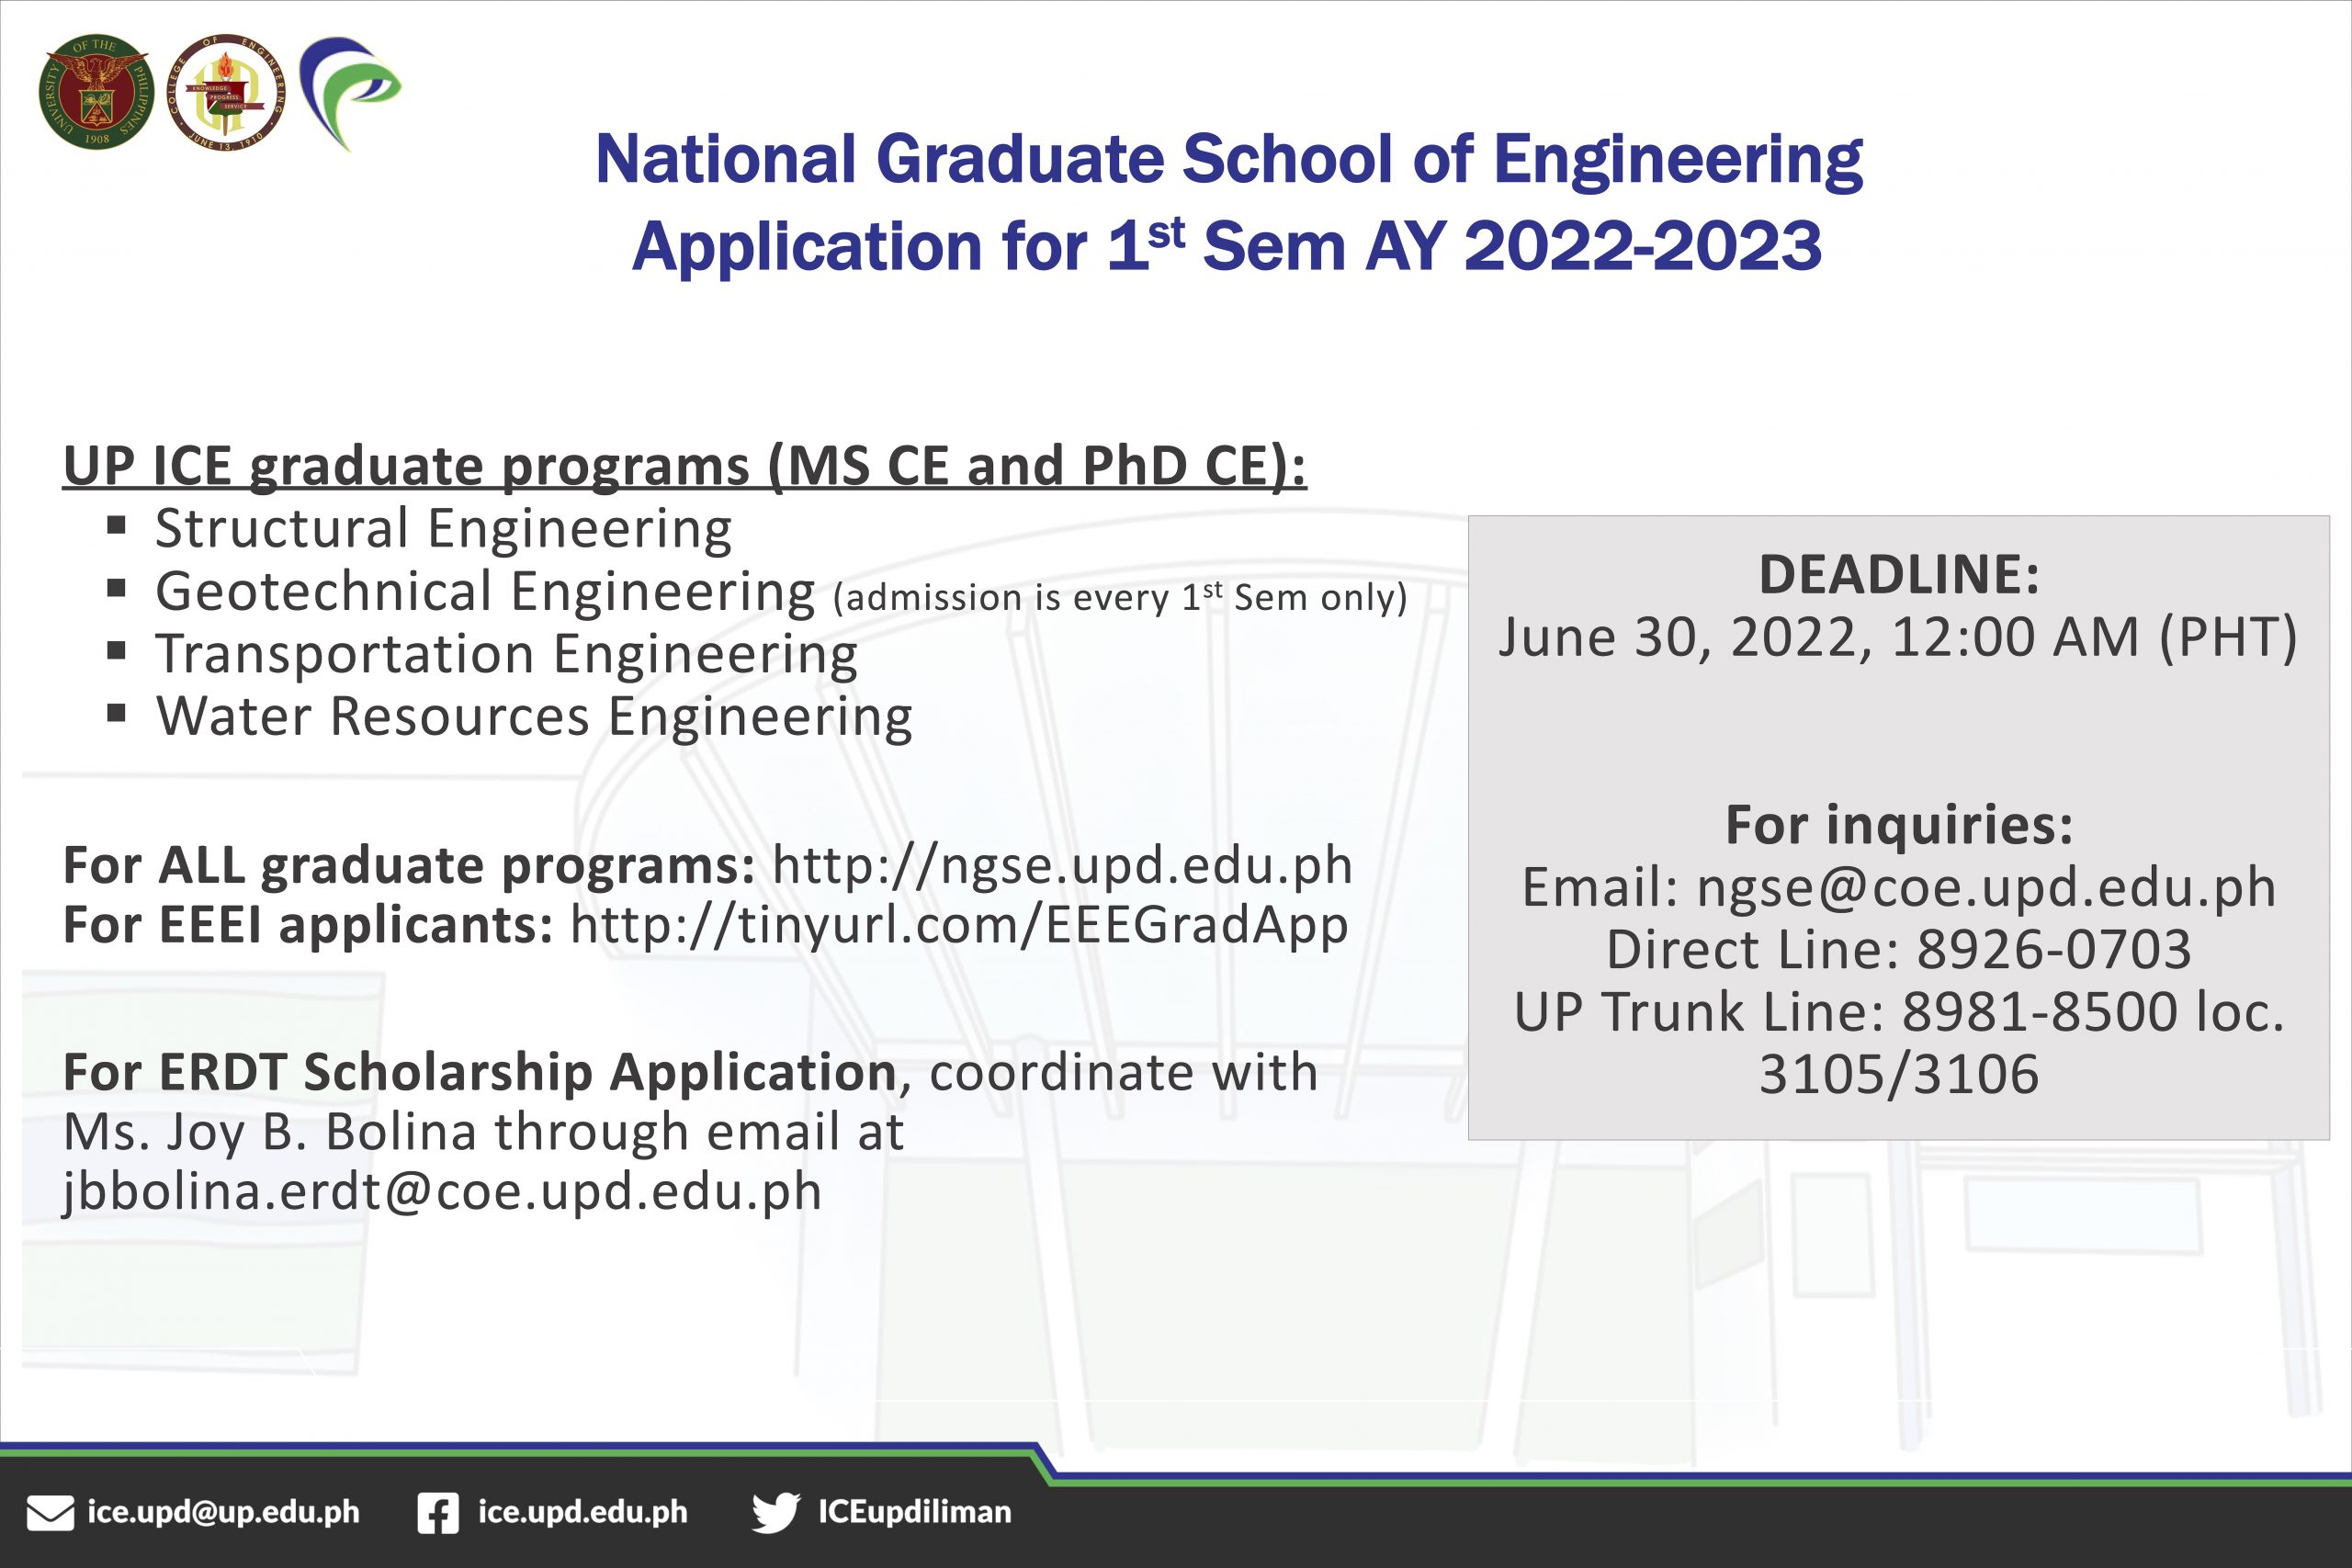 NGSE Applications for 1st Sem, AY2022-2023